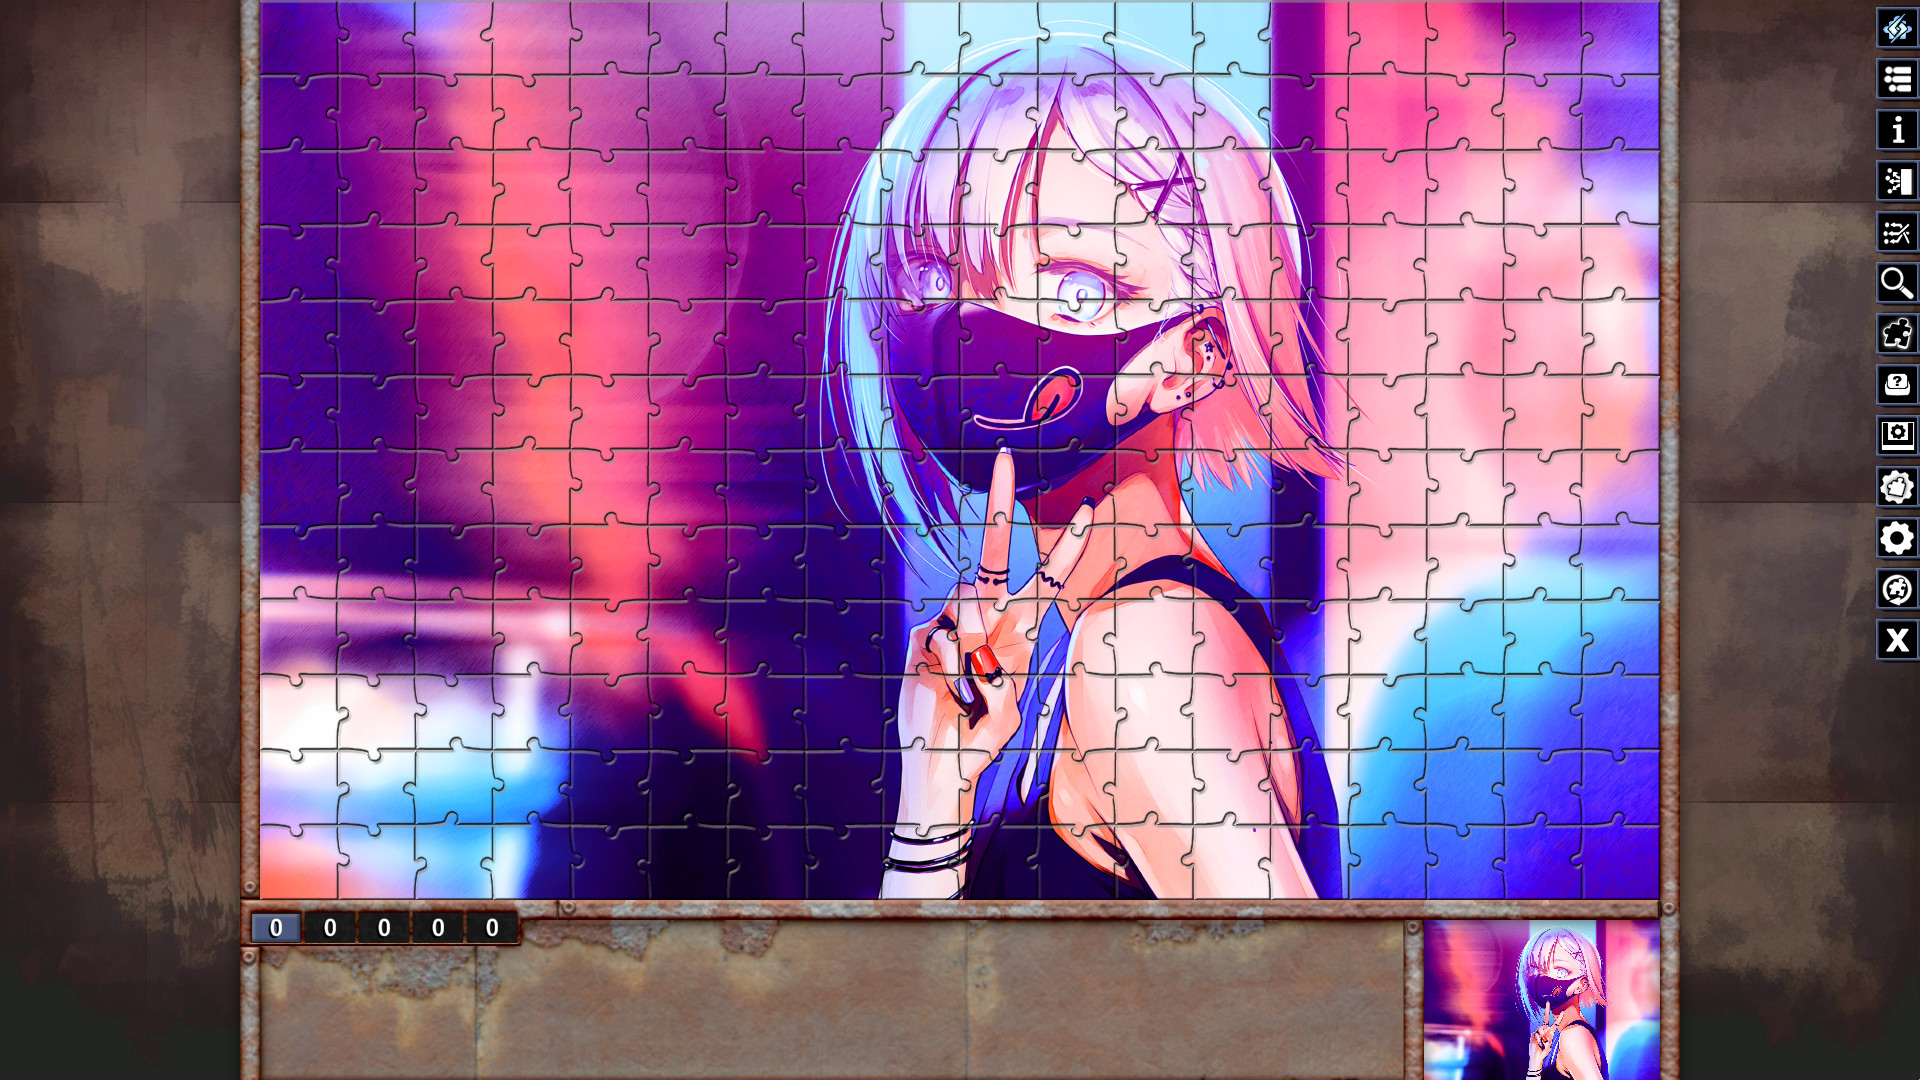 Pixel Puzzles Illustrations & Anime - Jigsaw Pack: Variety Pack 1 screenshot